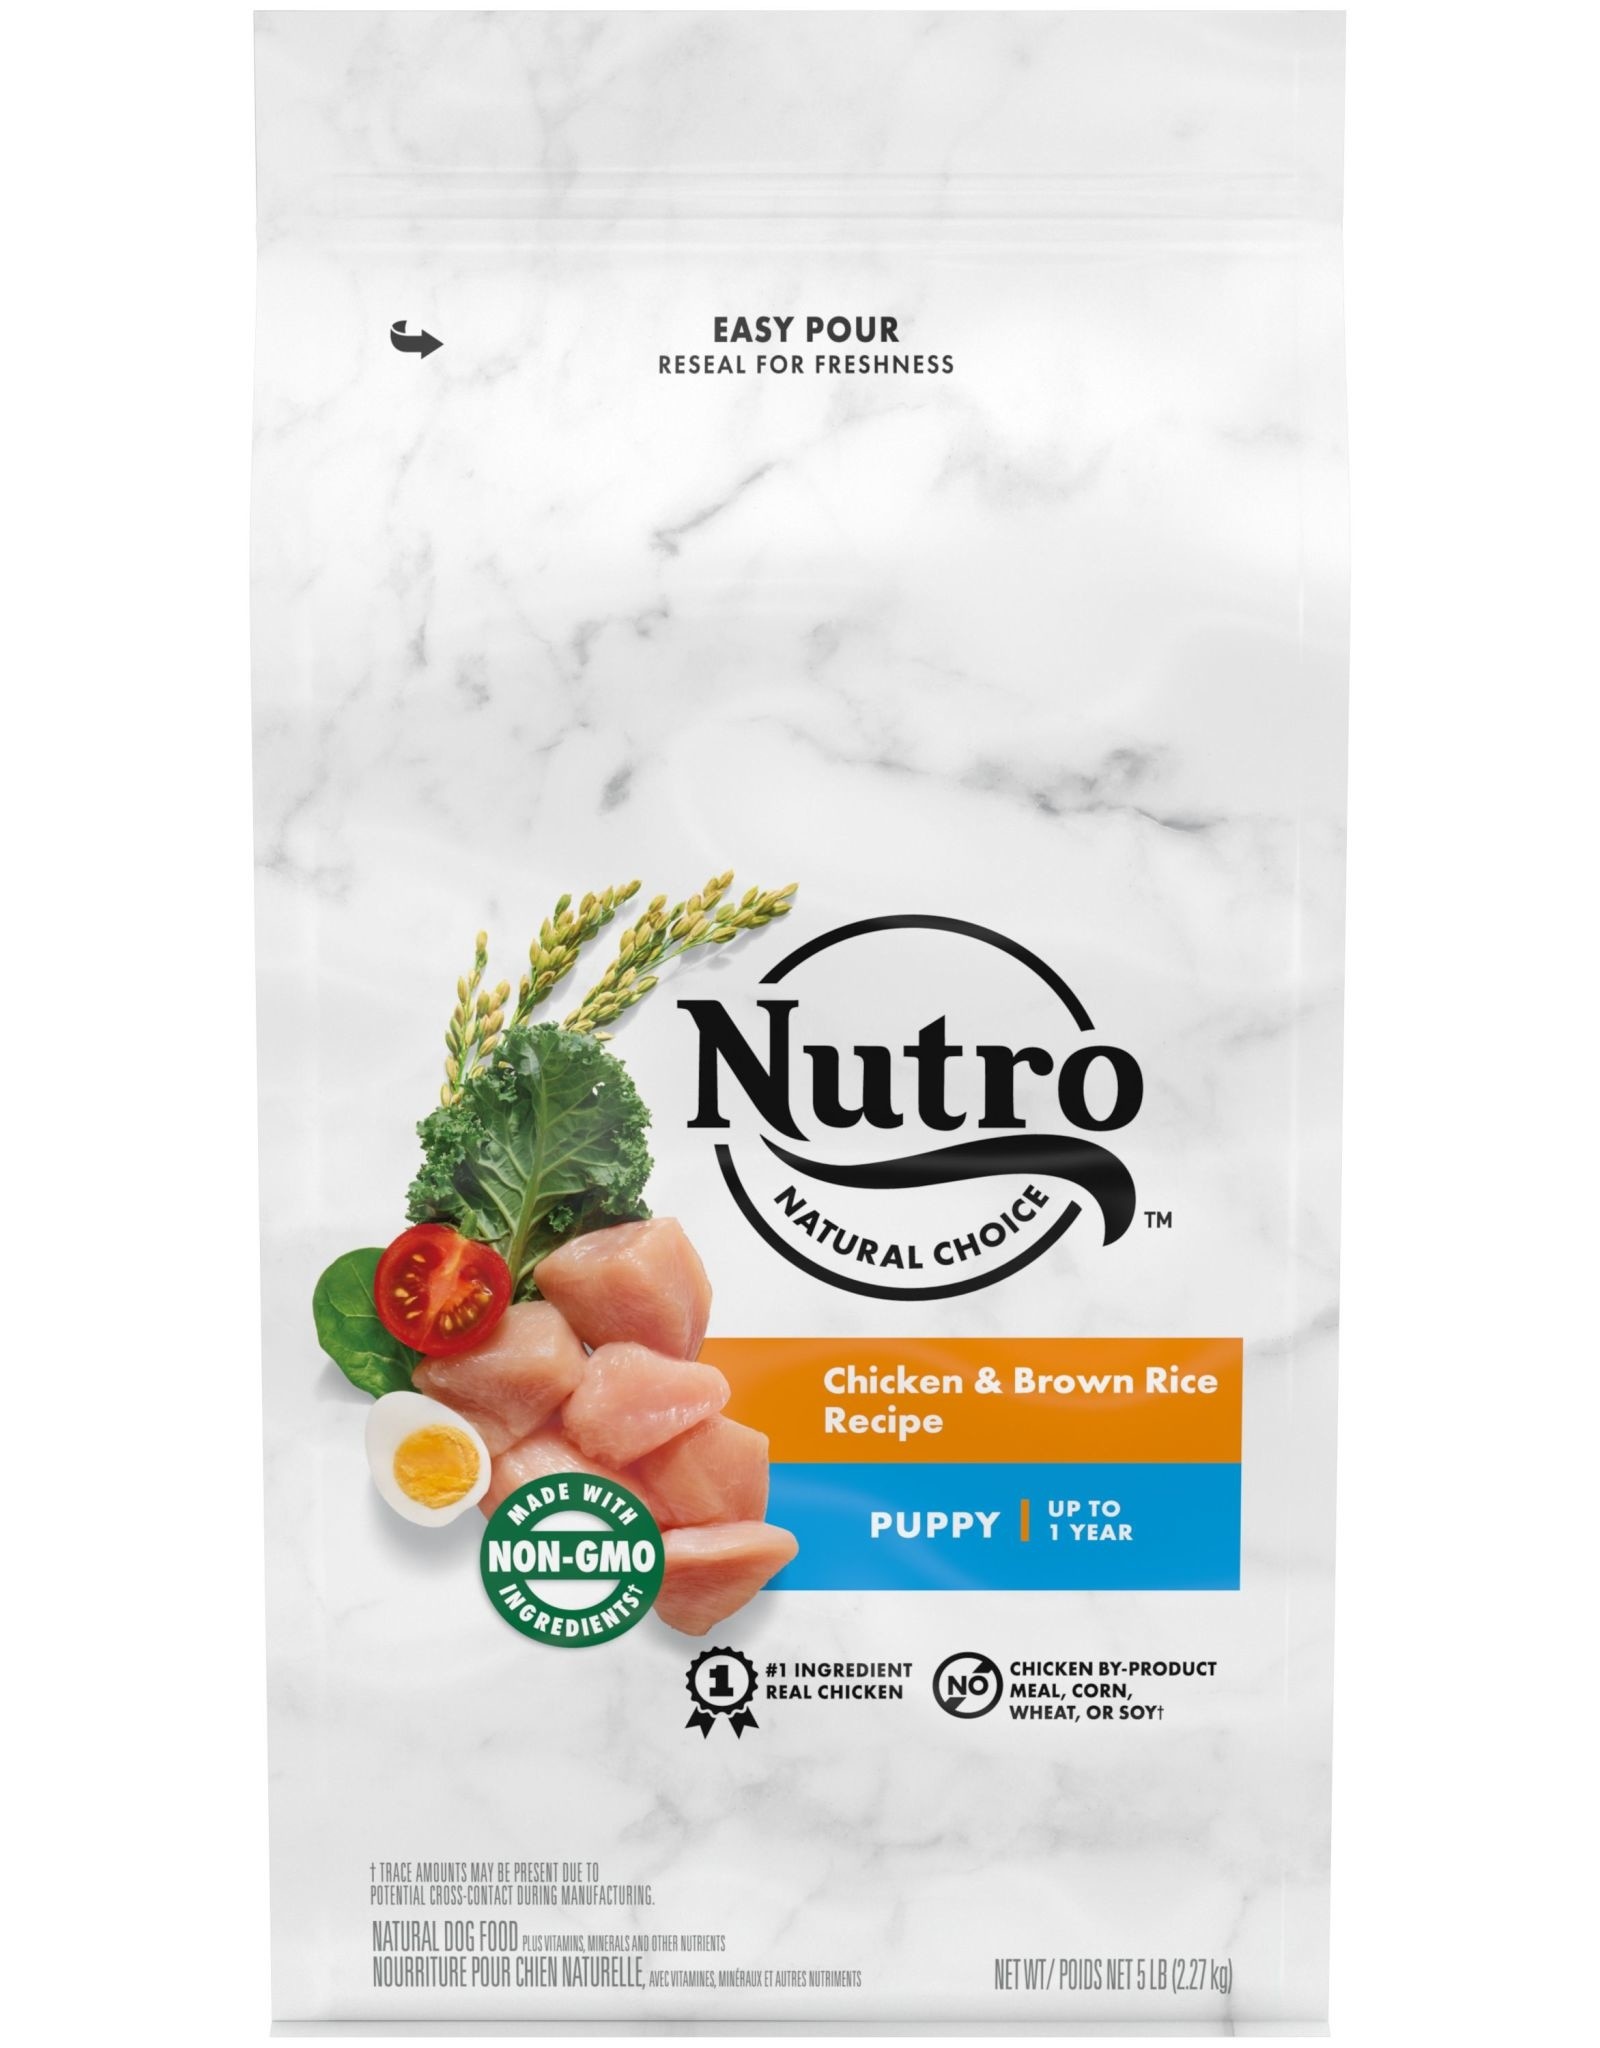 NUTRO PRODUCTS  INC. NUTRO NATURAL CHOICE PUPPY CHICKEN 15LBS